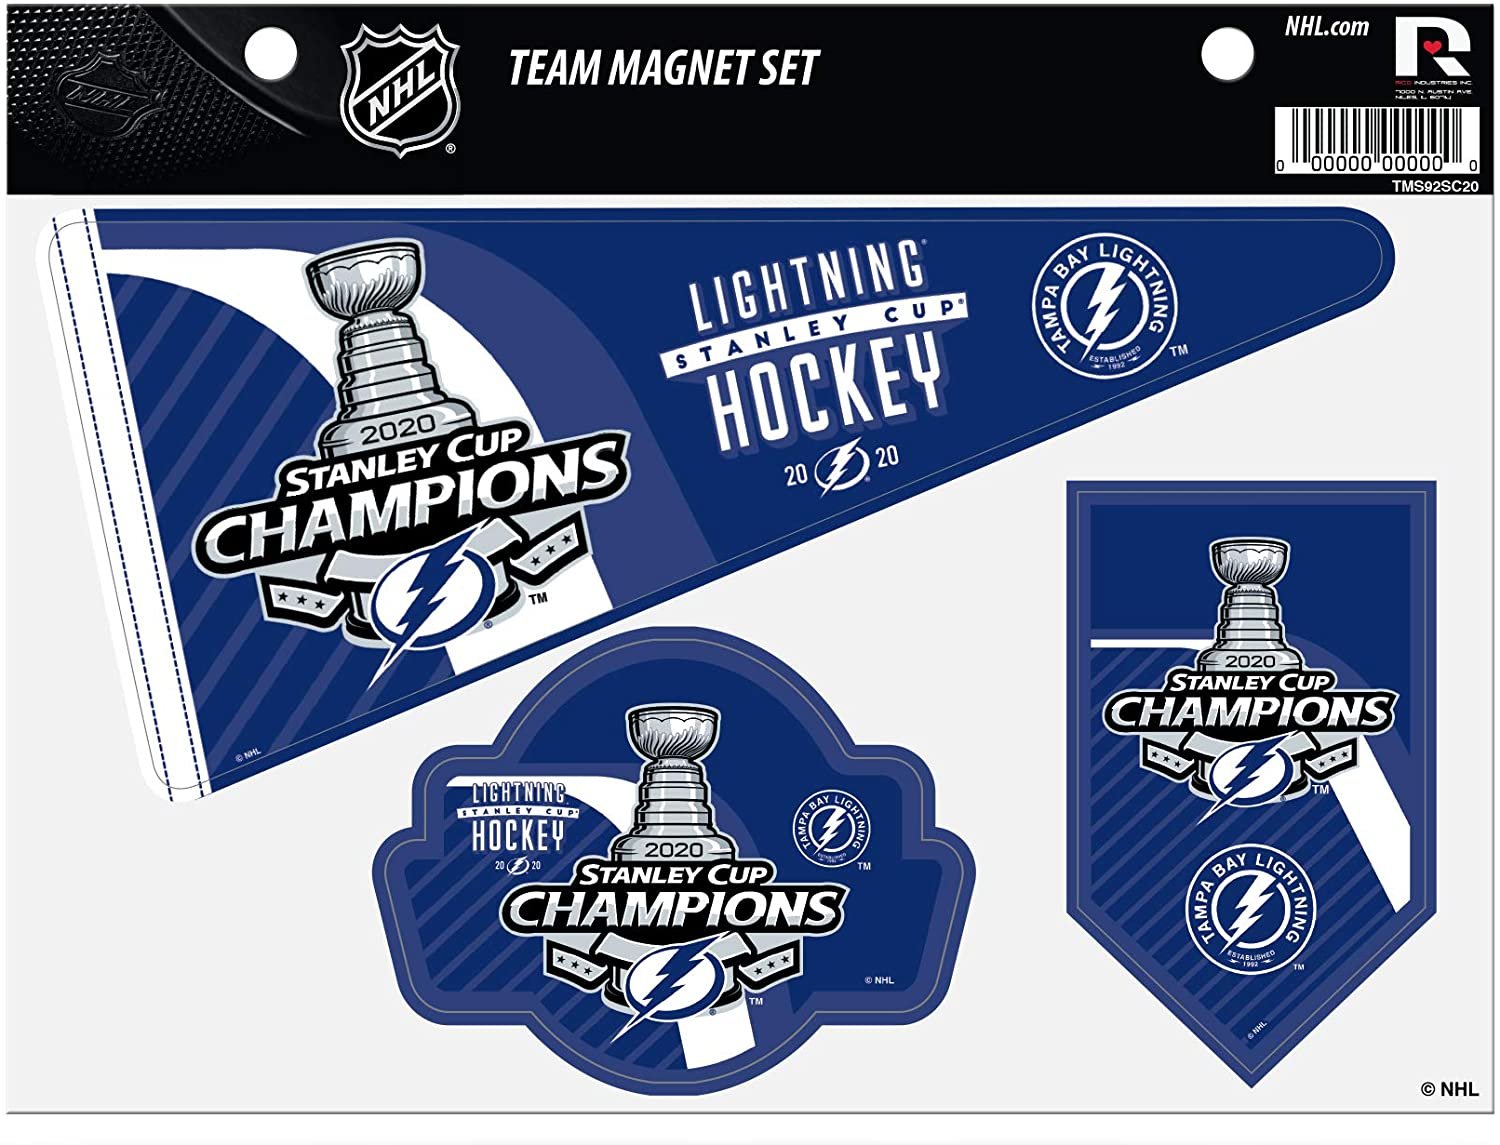 Tampa Bay Lightning 2020 Stanley Cup Champions Multi Magnet Sheet 8x11 Inch